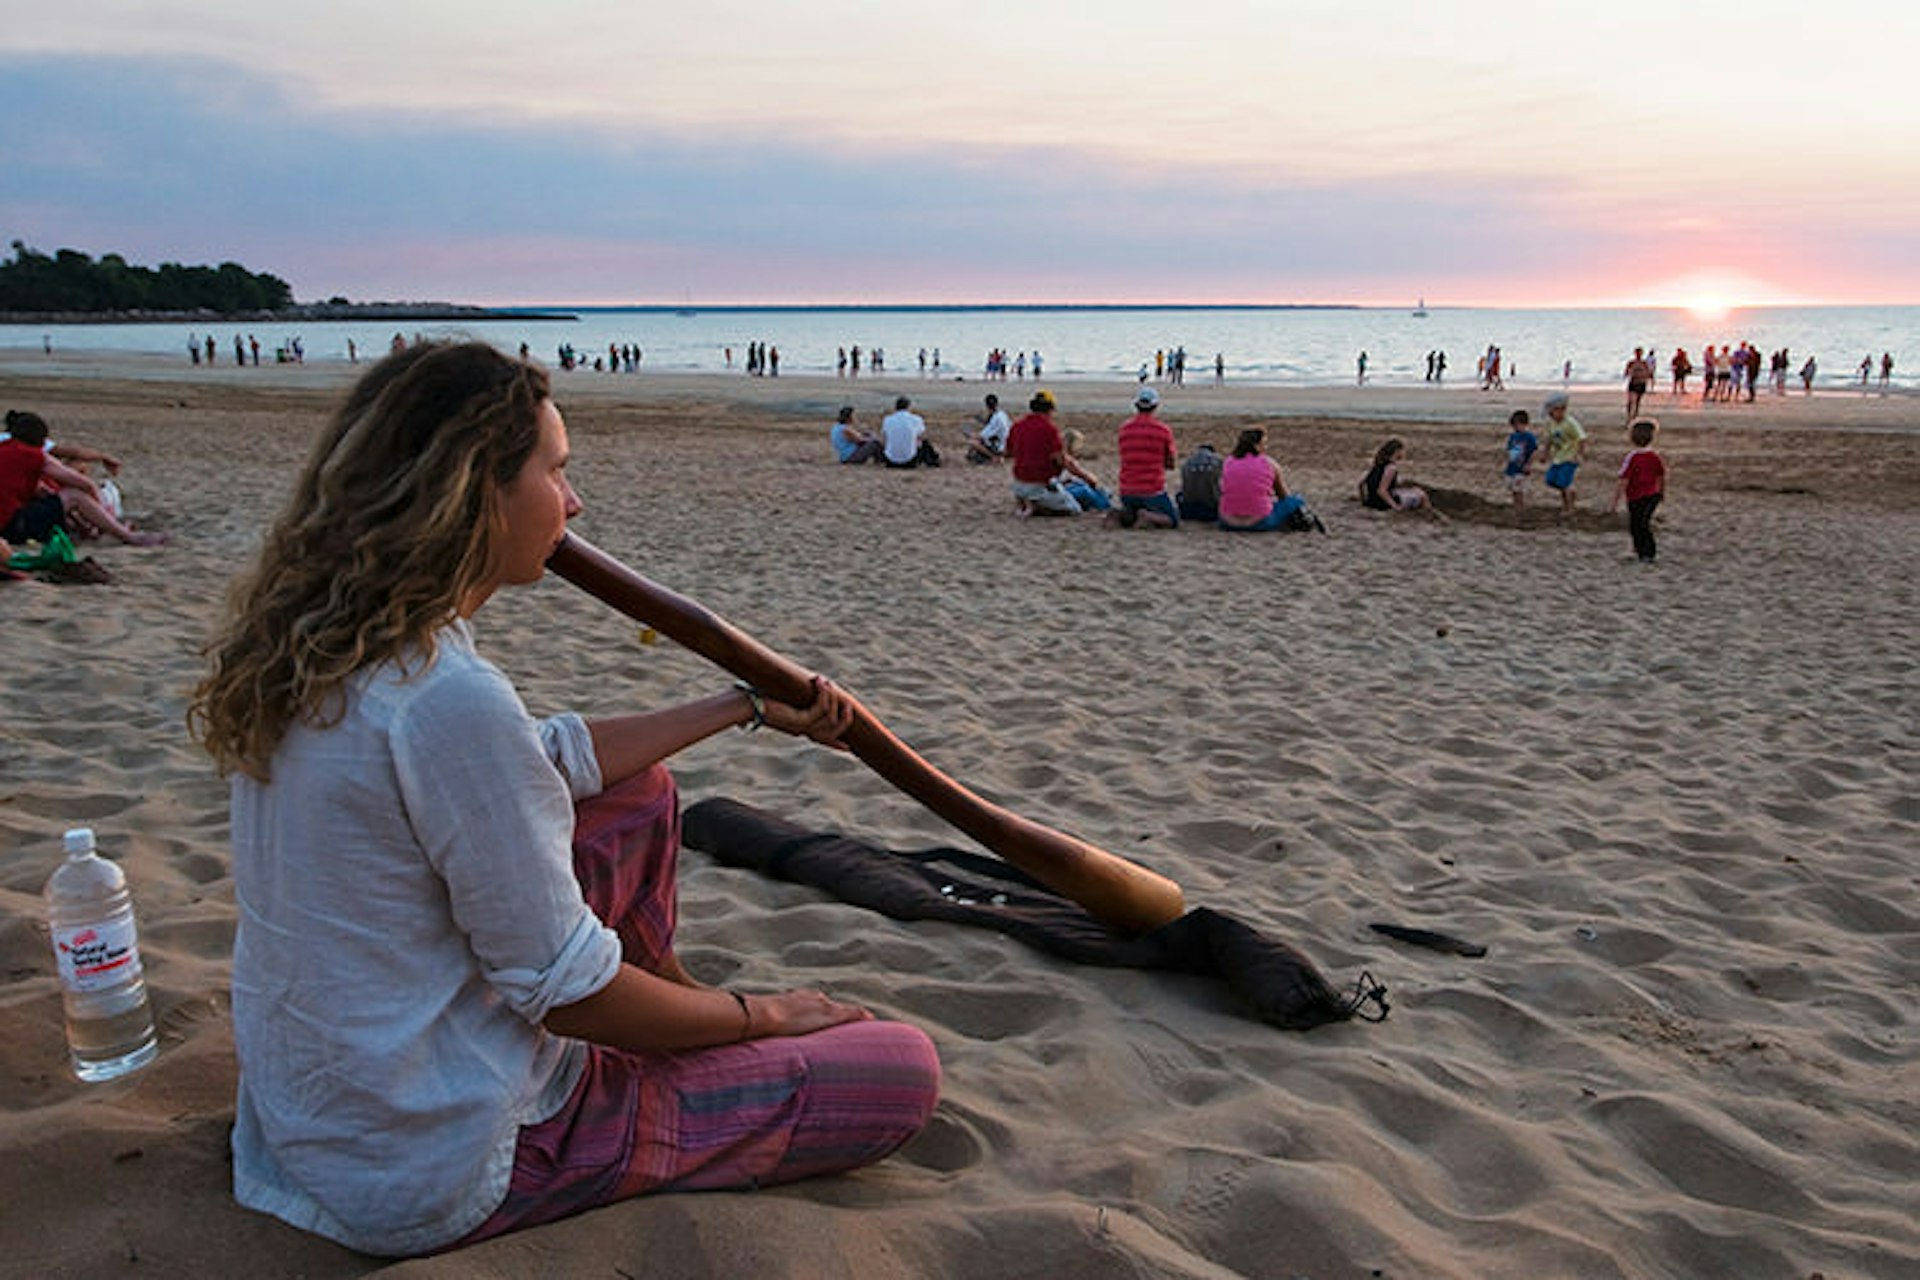 Why not gift your didgeridoo to a fellow traveller before the return flight? Image by Grant Dixon / Lonely Planet Images / Getty Images